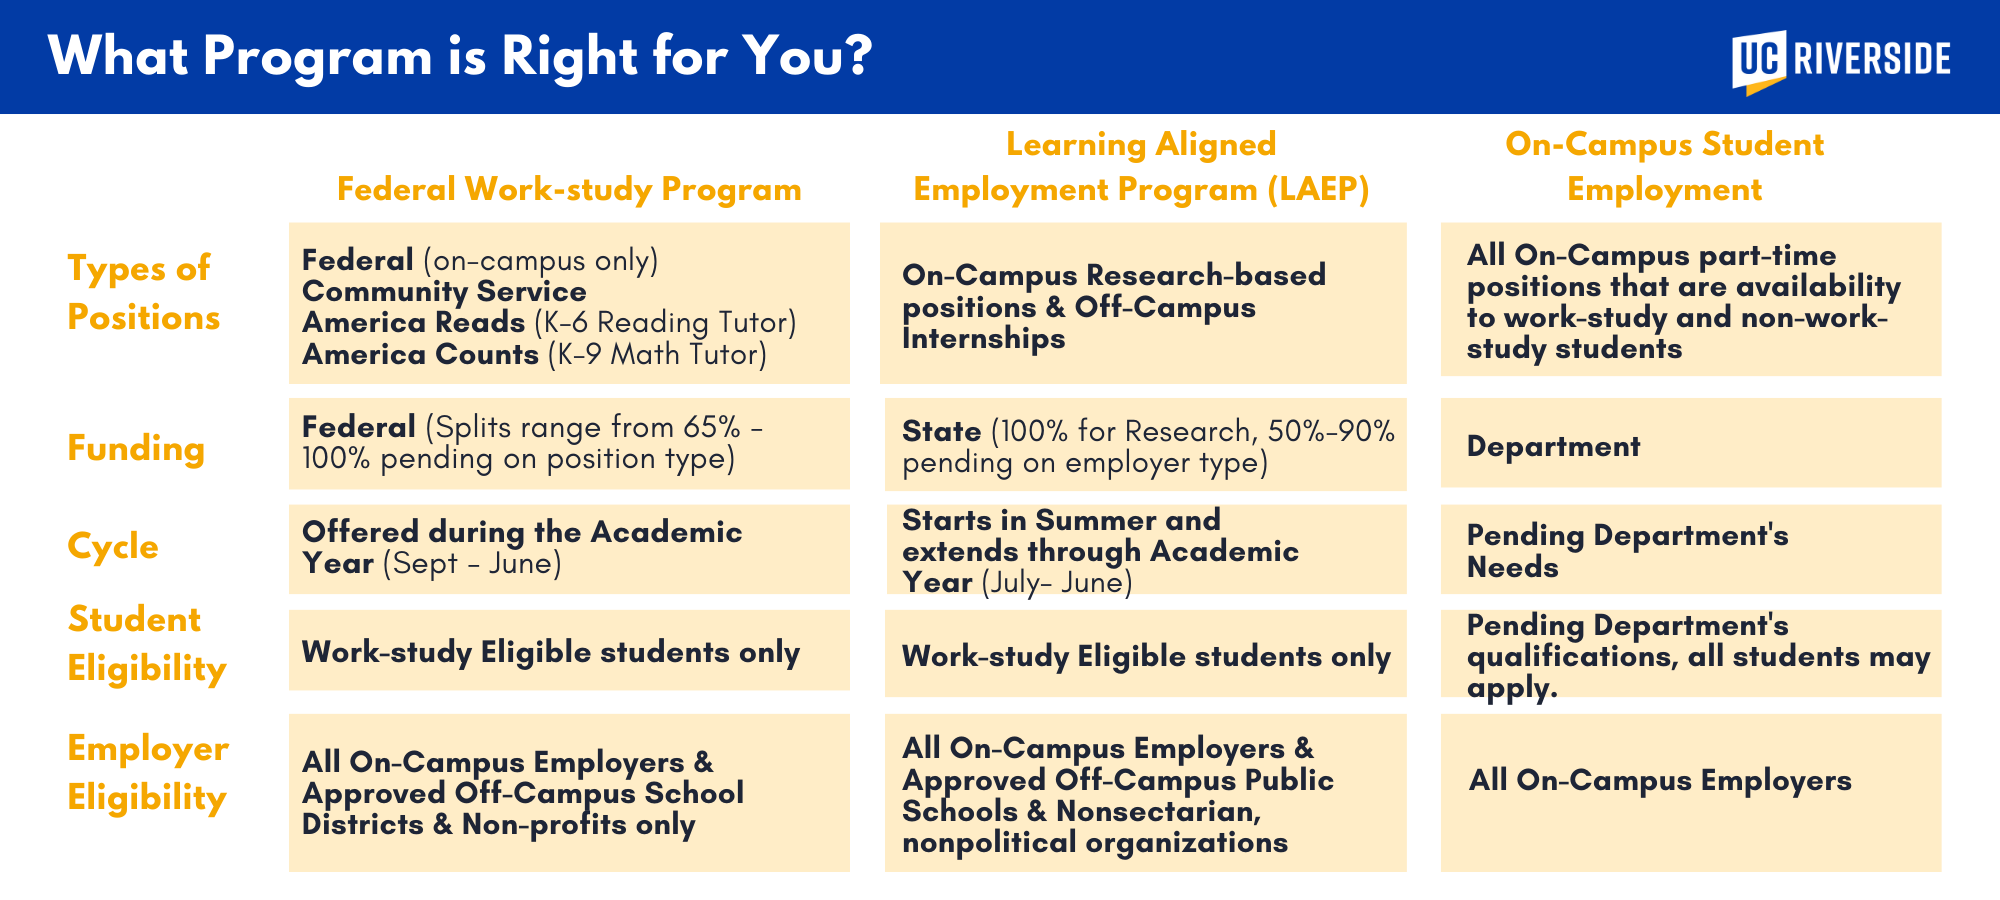 Student Employment - what program is right for you?